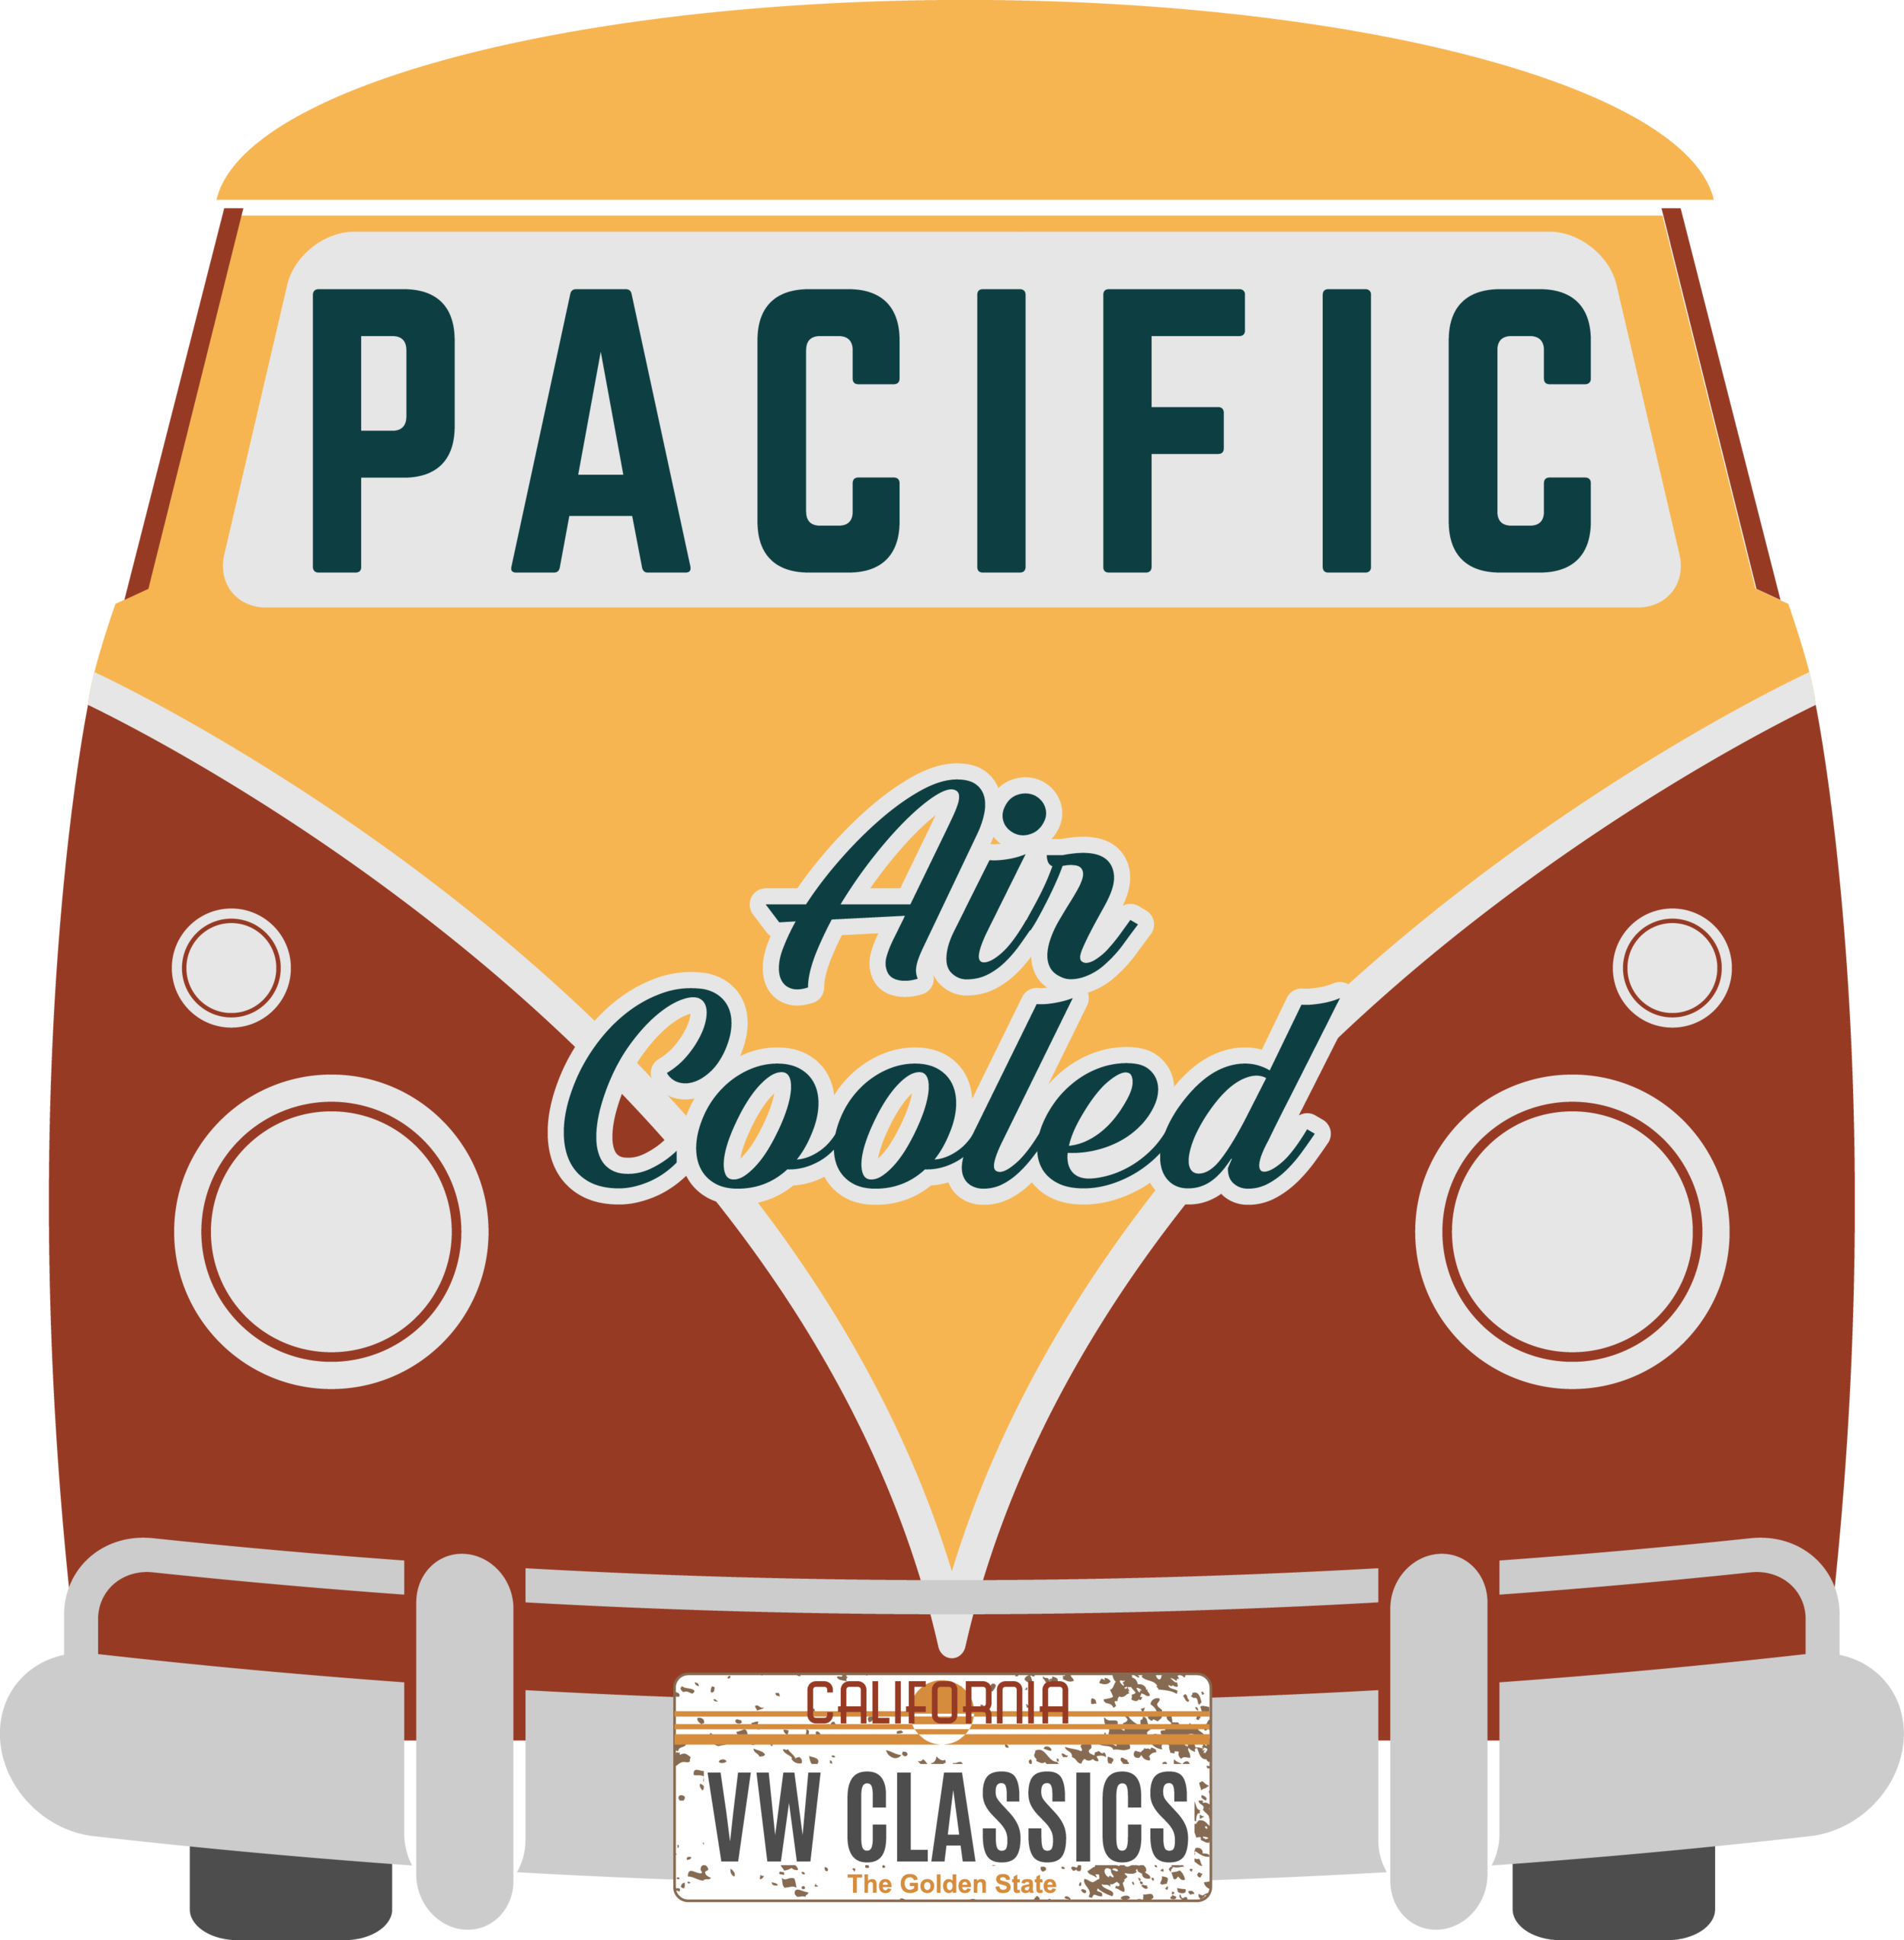 Pacific air cooled